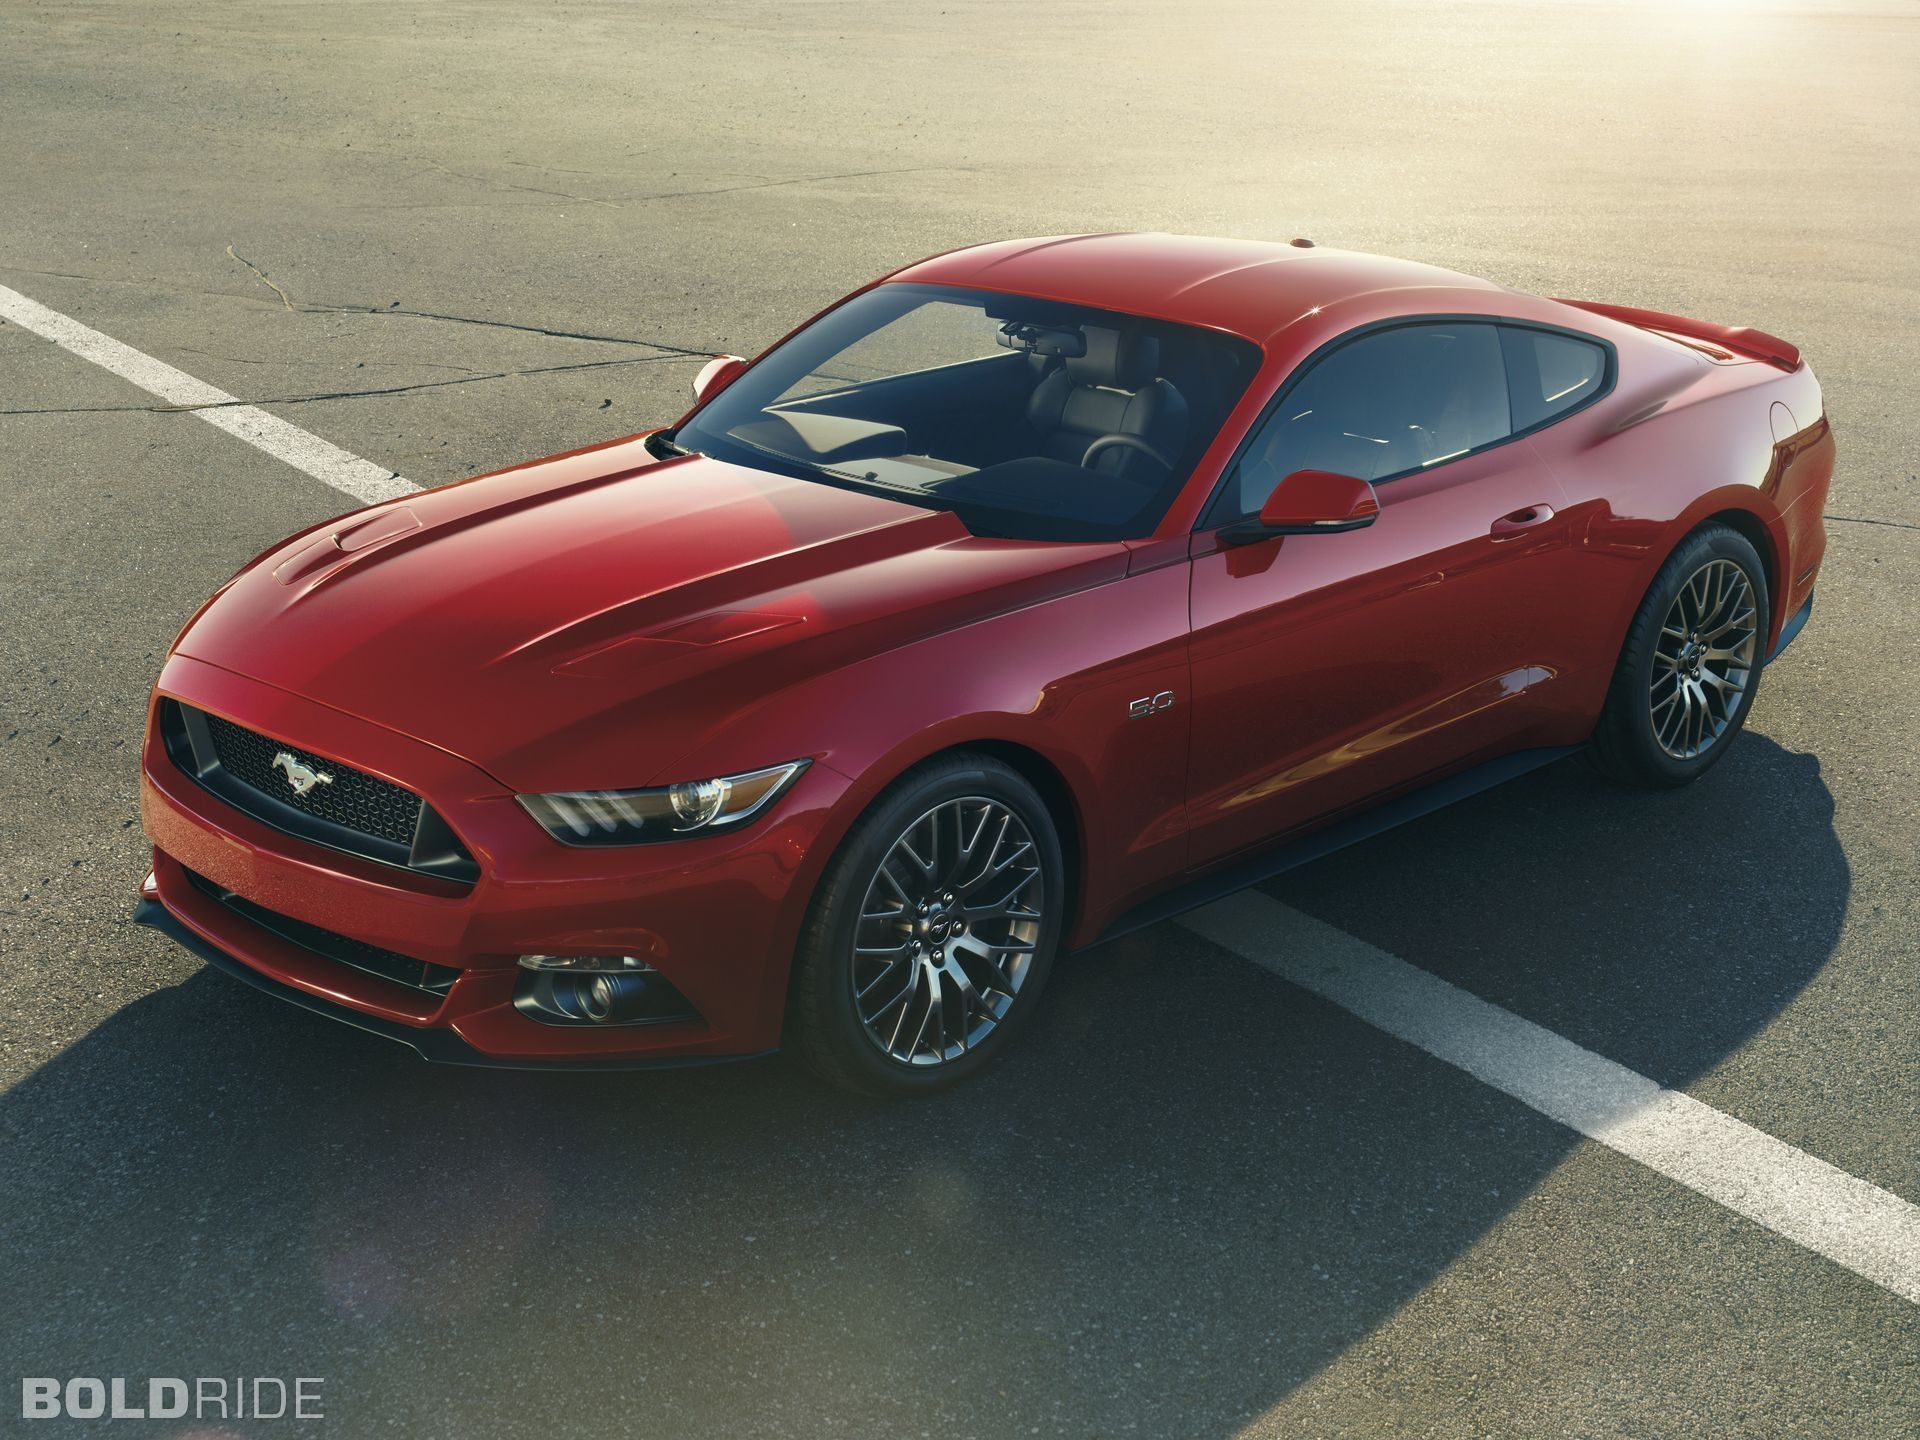 2015 Ford Mustang GT Images | Pictures and Videos